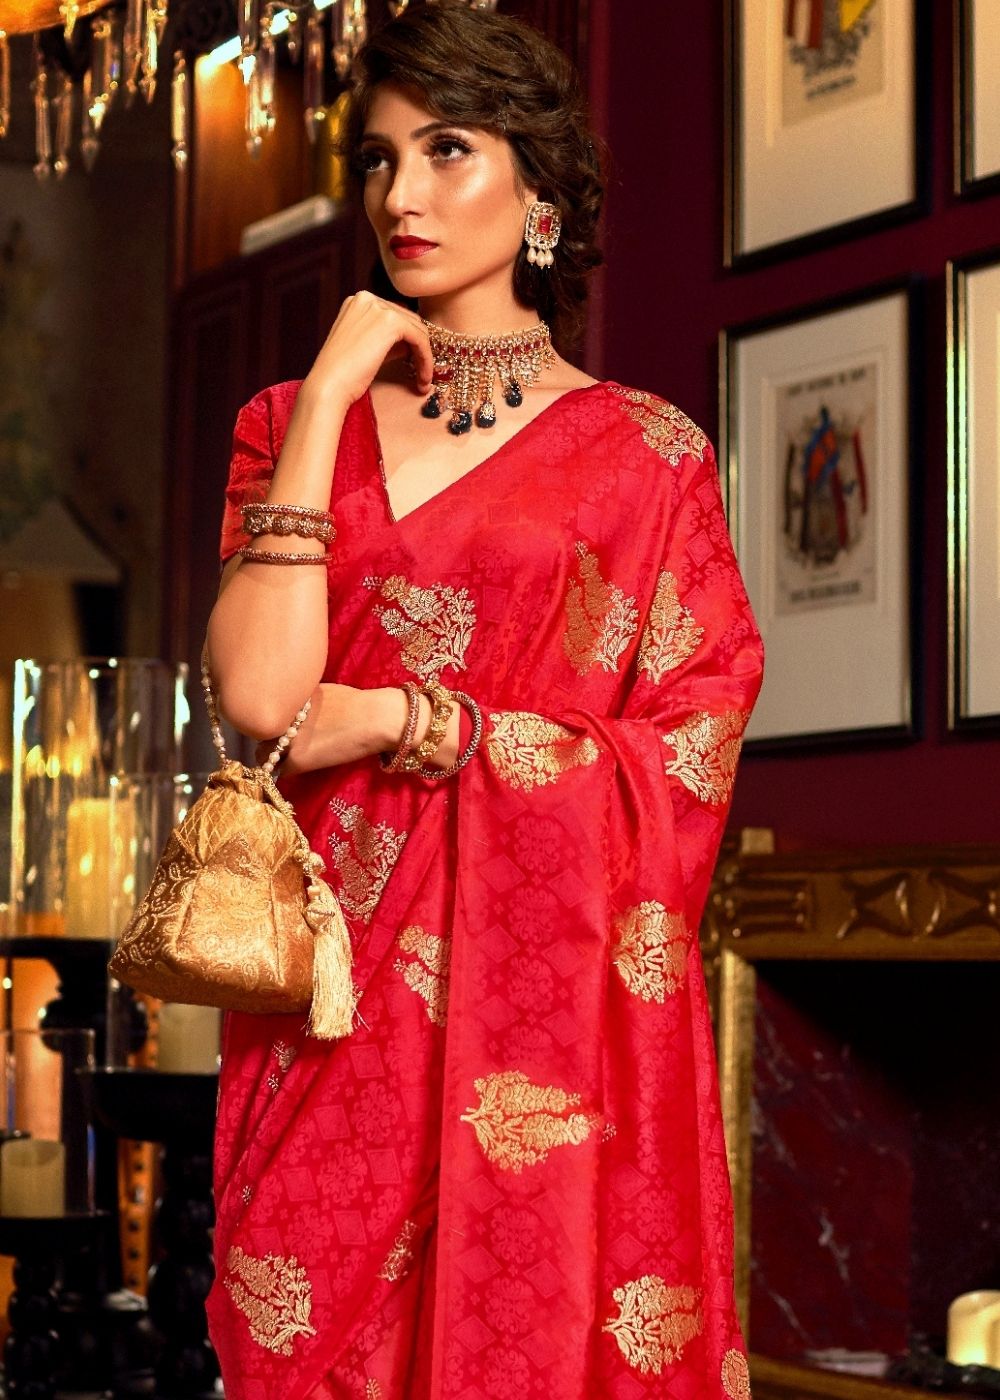 Scarlet Red Satin Woven Silk Saree with overall Golden Buti - Colorful Saree